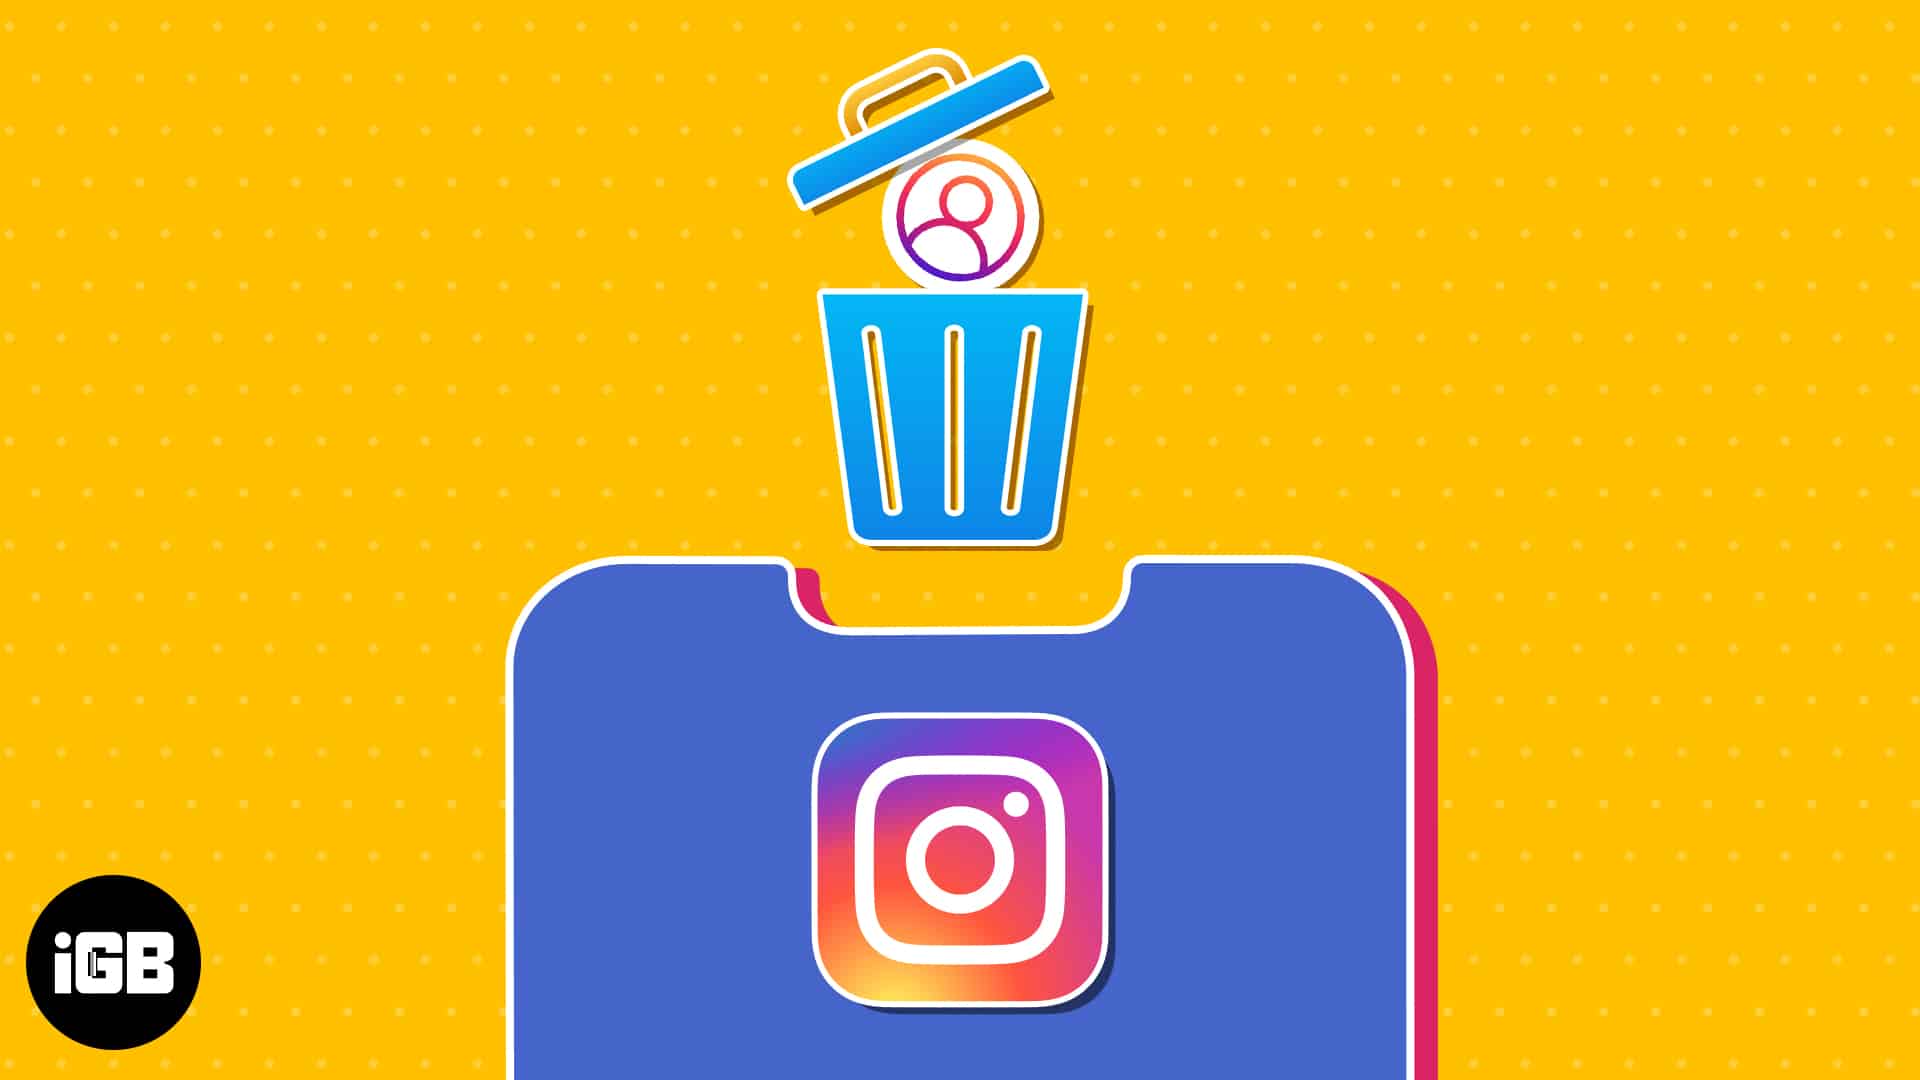 How to delete Instagram account on iPhone (or deactivate it)